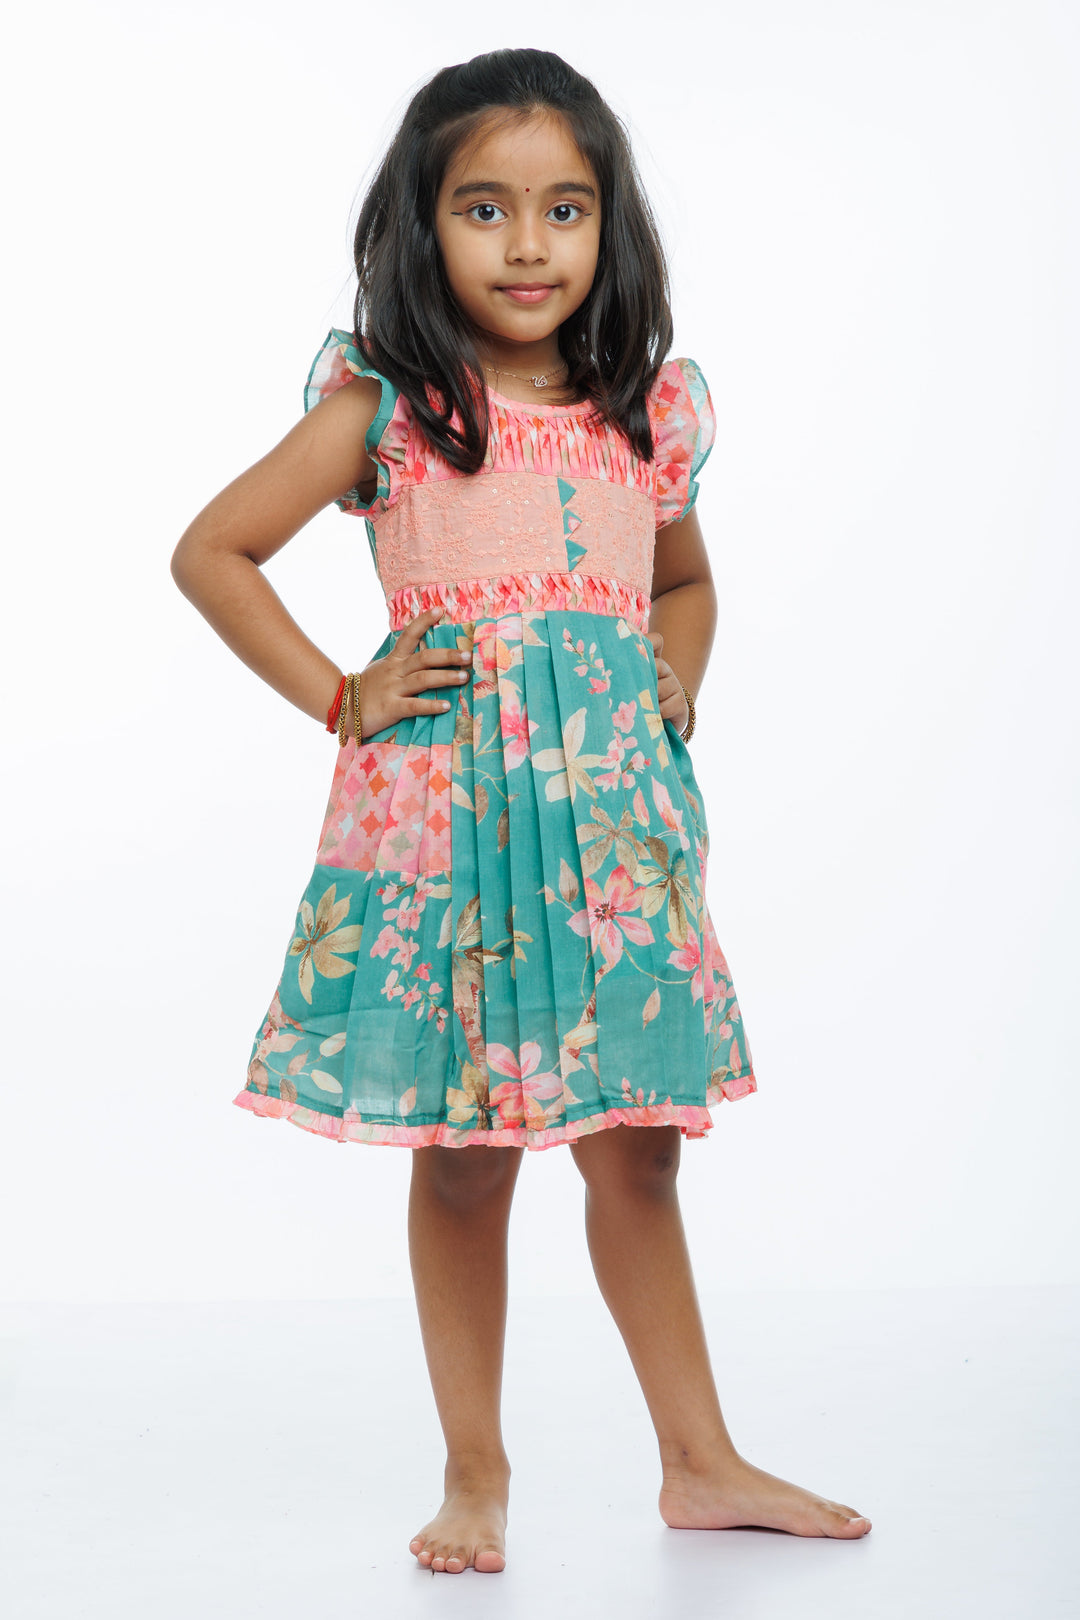 The Nesavu Girls Cotton Frock Girls Blossom Pleated Cotton Frock with Chikan Embroidery Nesavu 22 (4Y) / Green / Cotton GFC1269A-22 Daily Wear Chic Cotton Floral Dress for Kids | Summer Fashion Essentials | The Nesavu